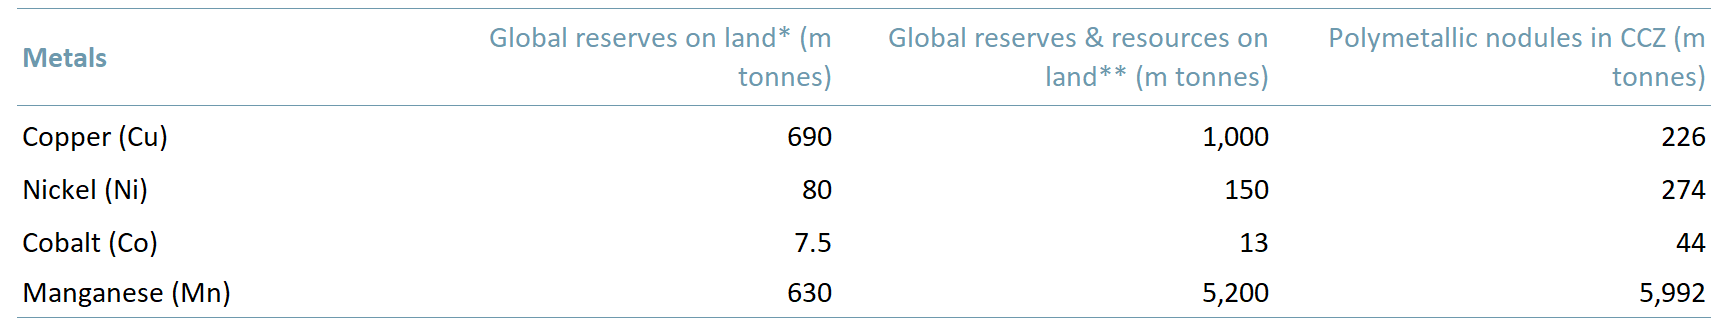 Land-based versus deep-sea mining reserves 2020_2021 excluding Mn and CCZ - 2014 data